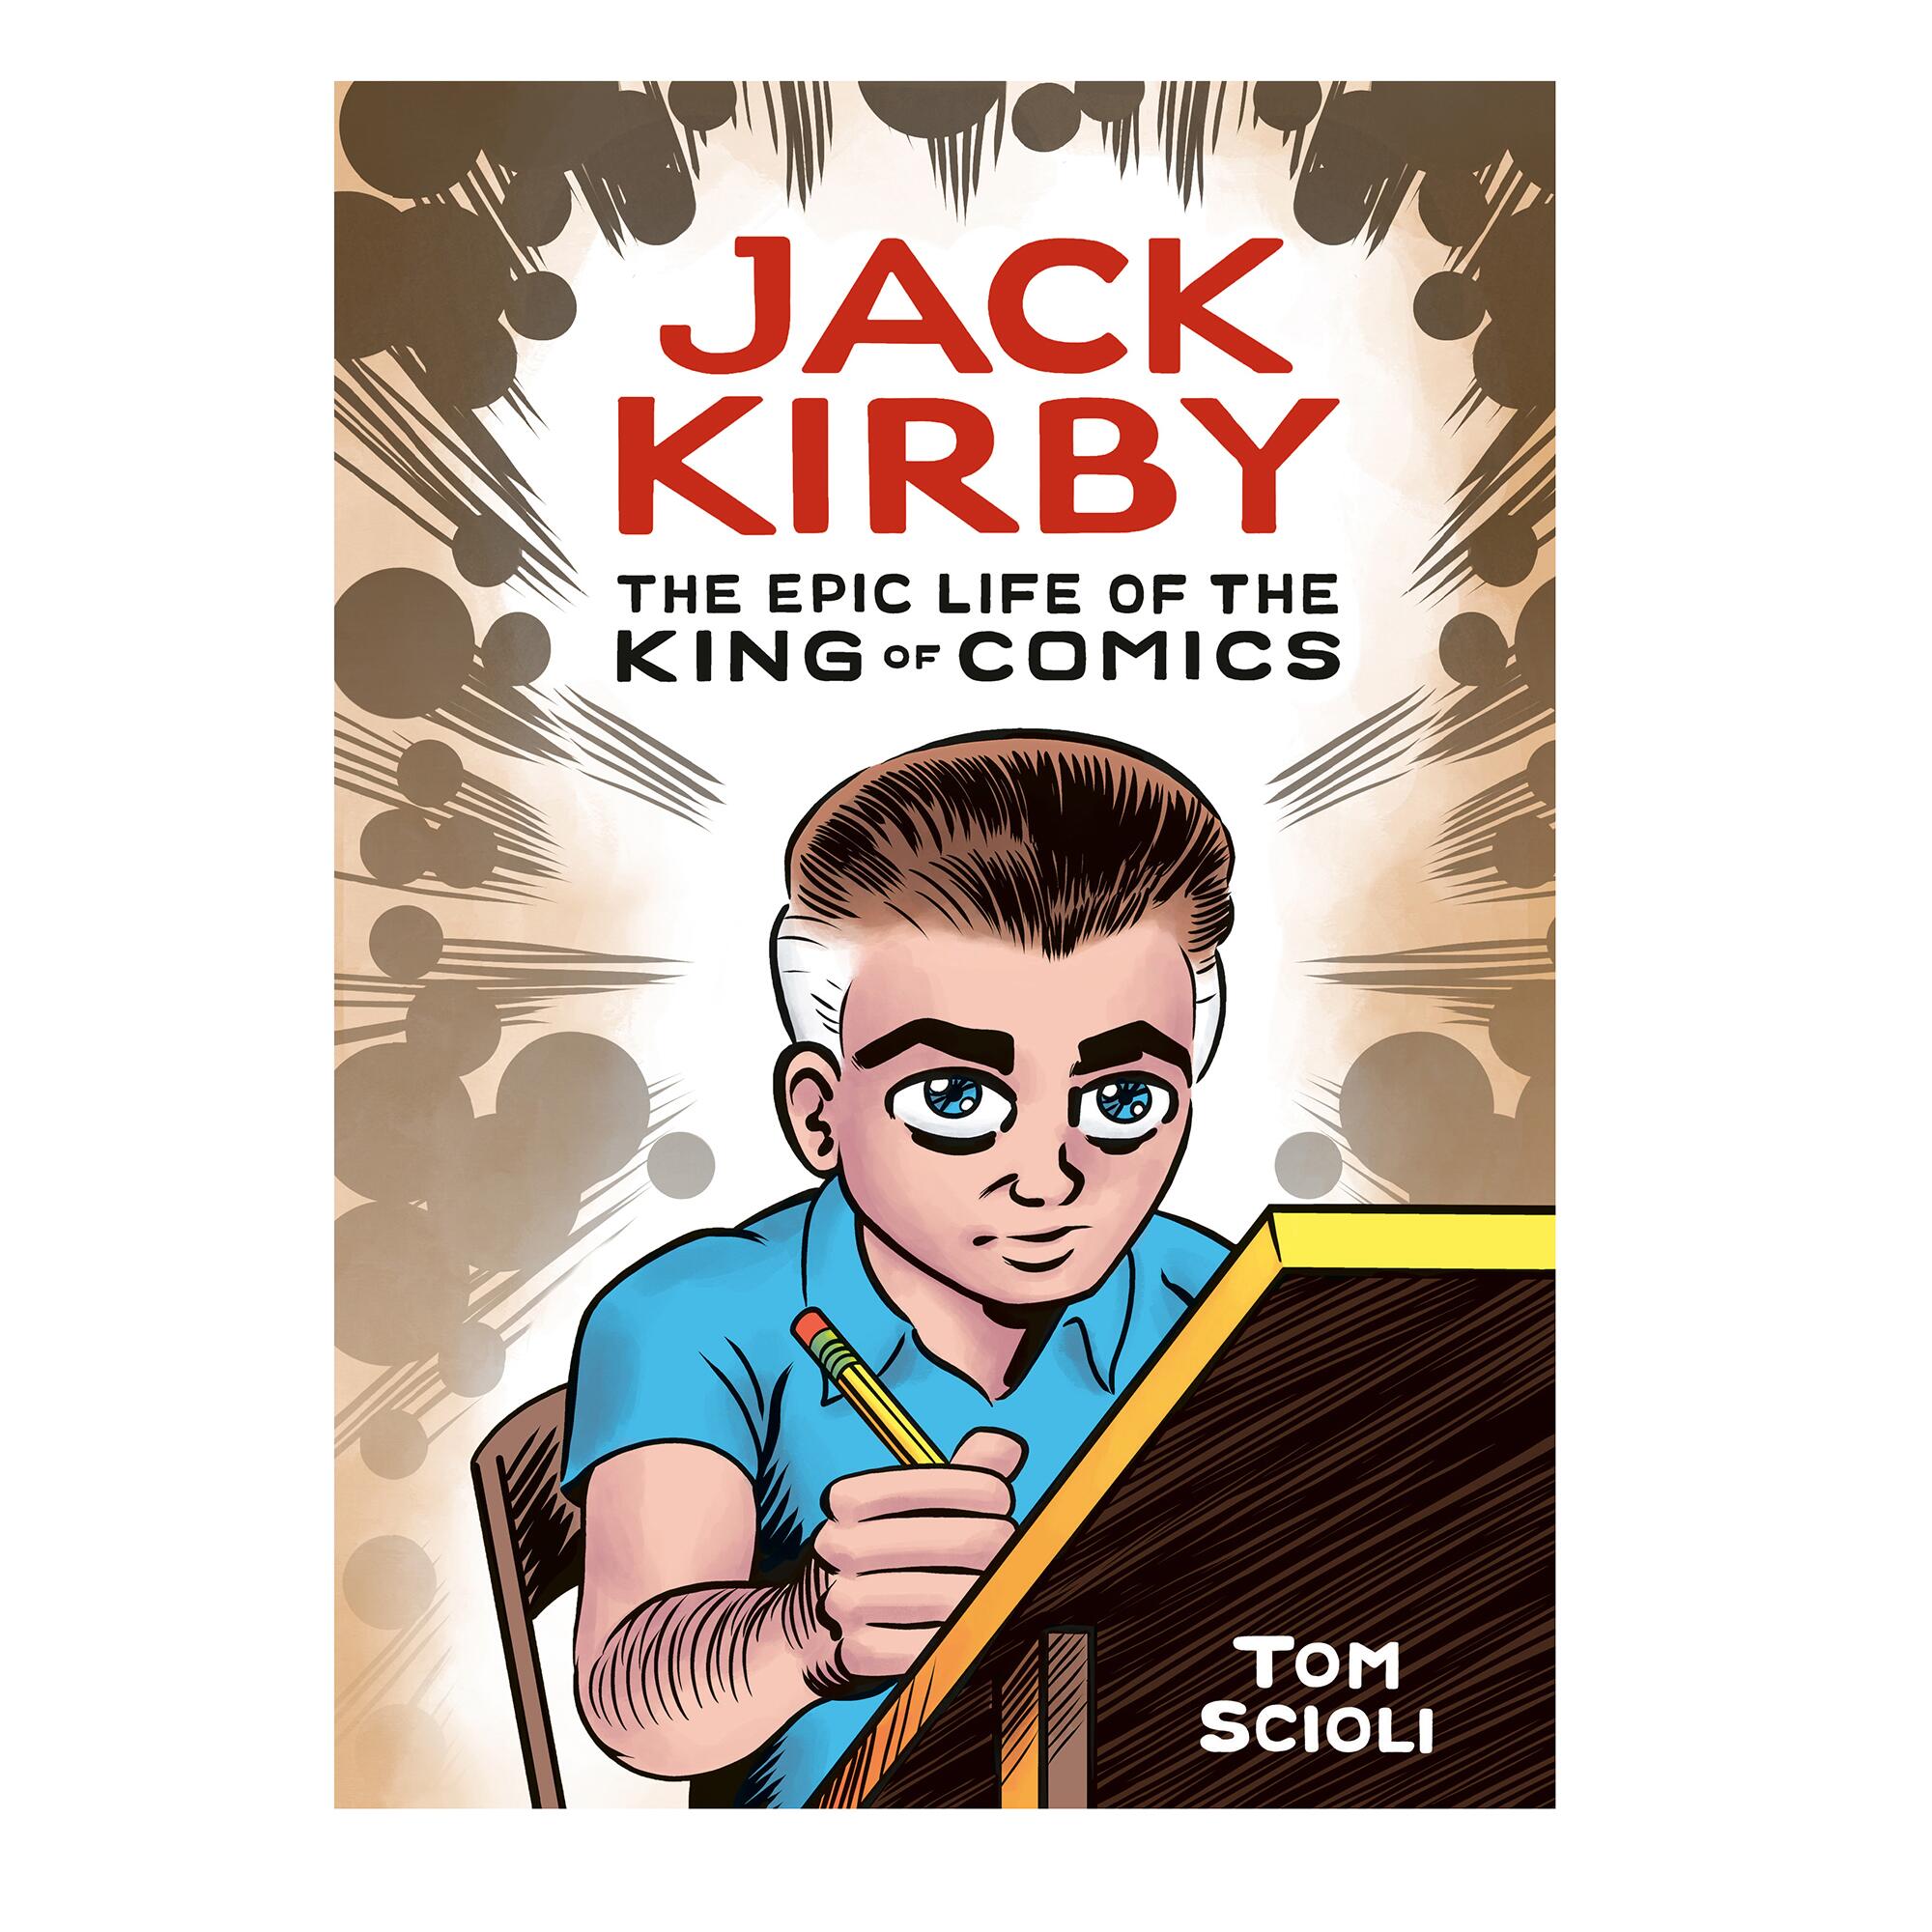 Cover of the book Jack Kirby, The Epic Life Of The King Of Comics by Tom Scioli.